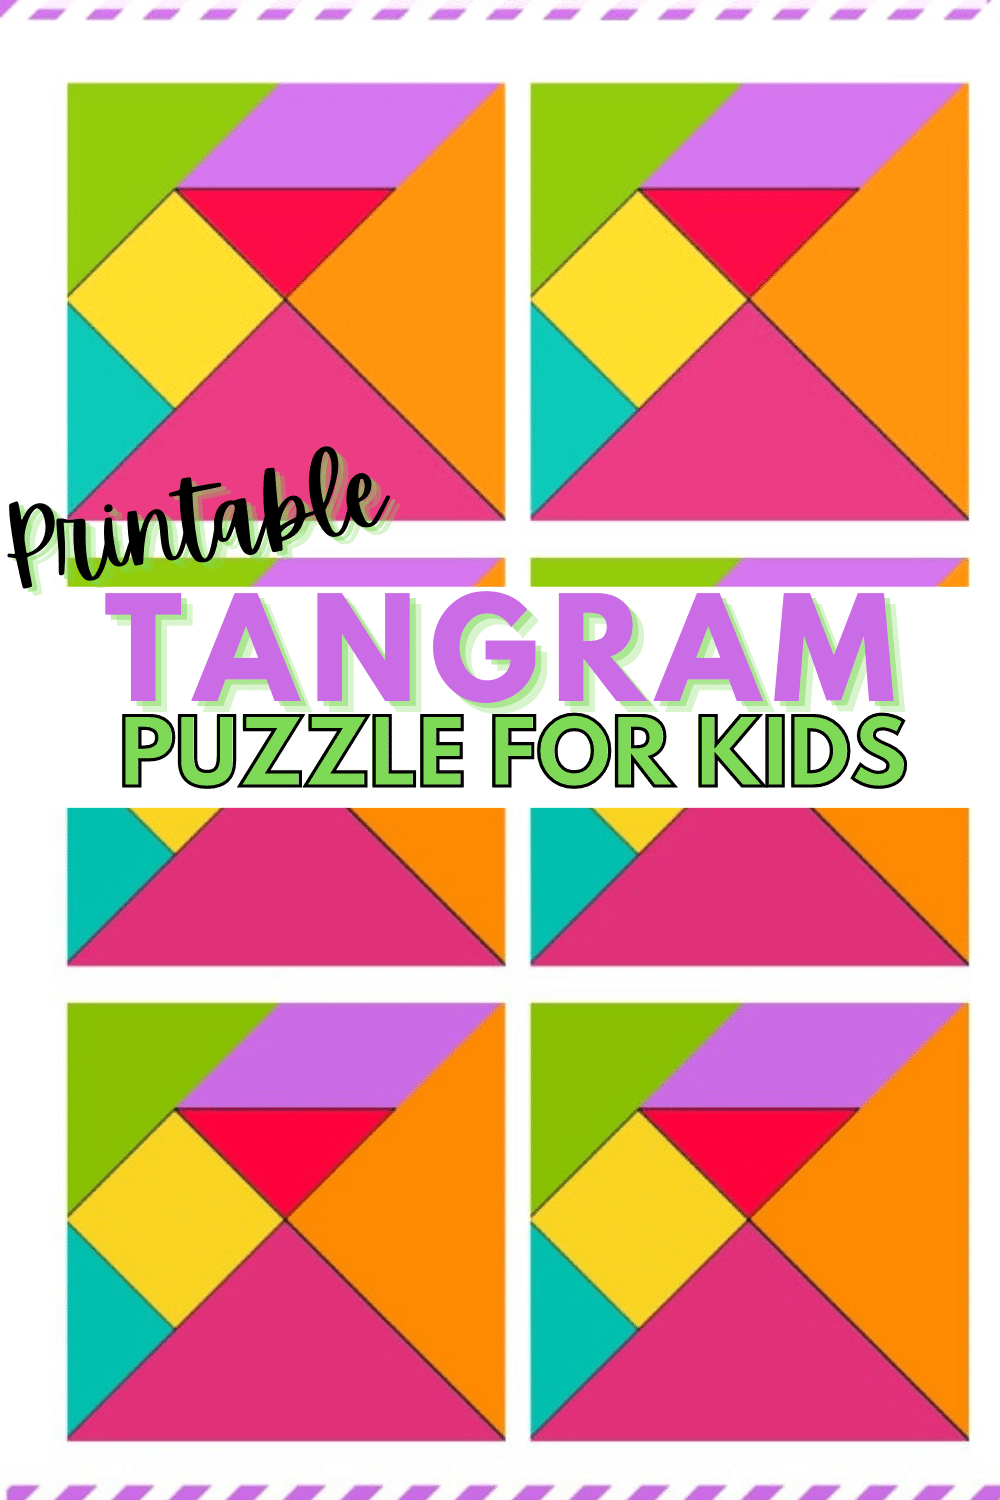 These printable tangram objects are great puzzles to complete. A kids activity that will keep their mind active and they will enjoy it too! #printables #tangrams #puzzles via @wondermomwannab